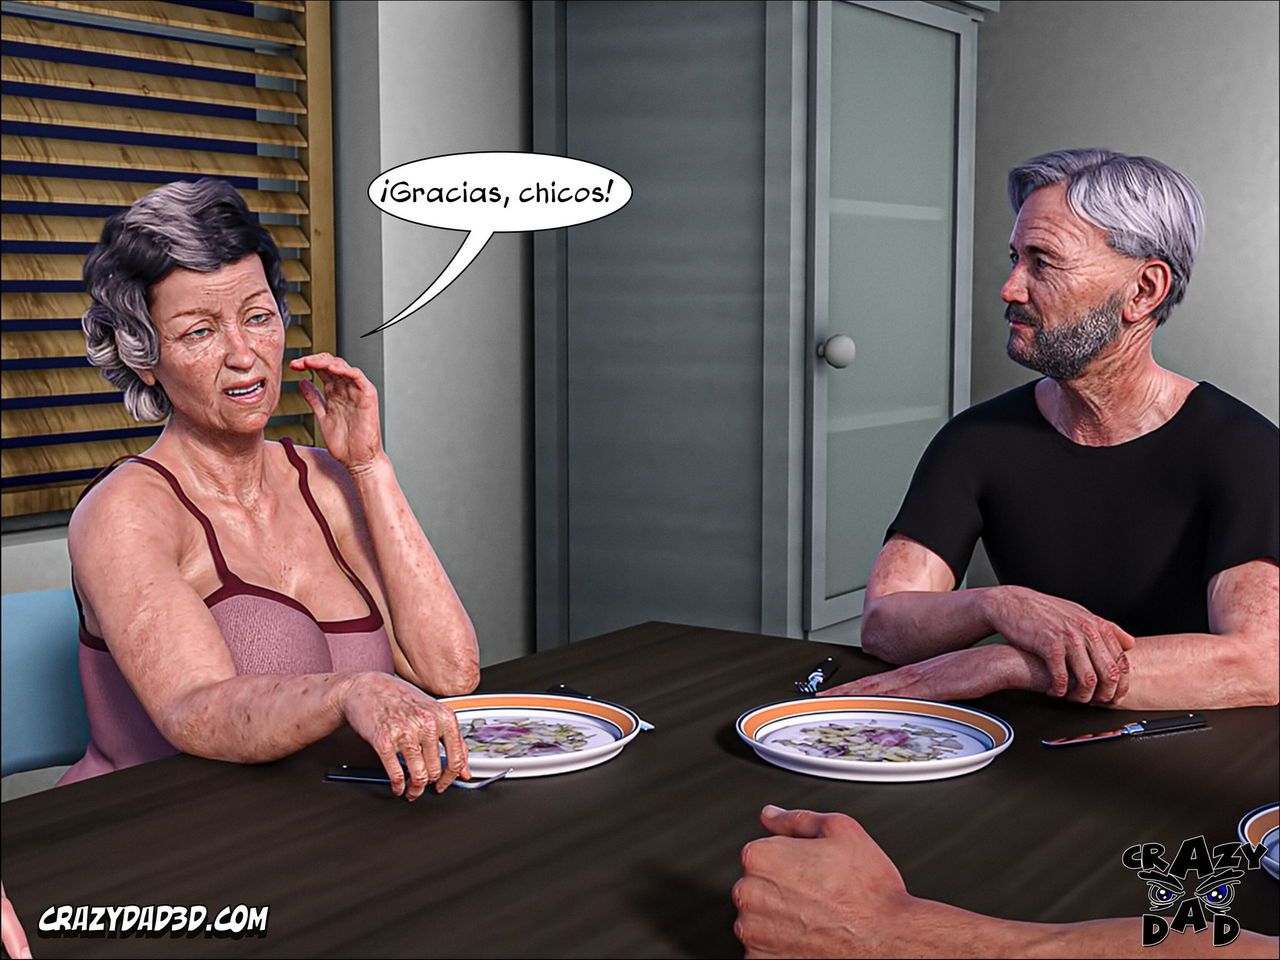 Father-in-Law at Home 15 (CrazyDad3D) (Spanish) 19